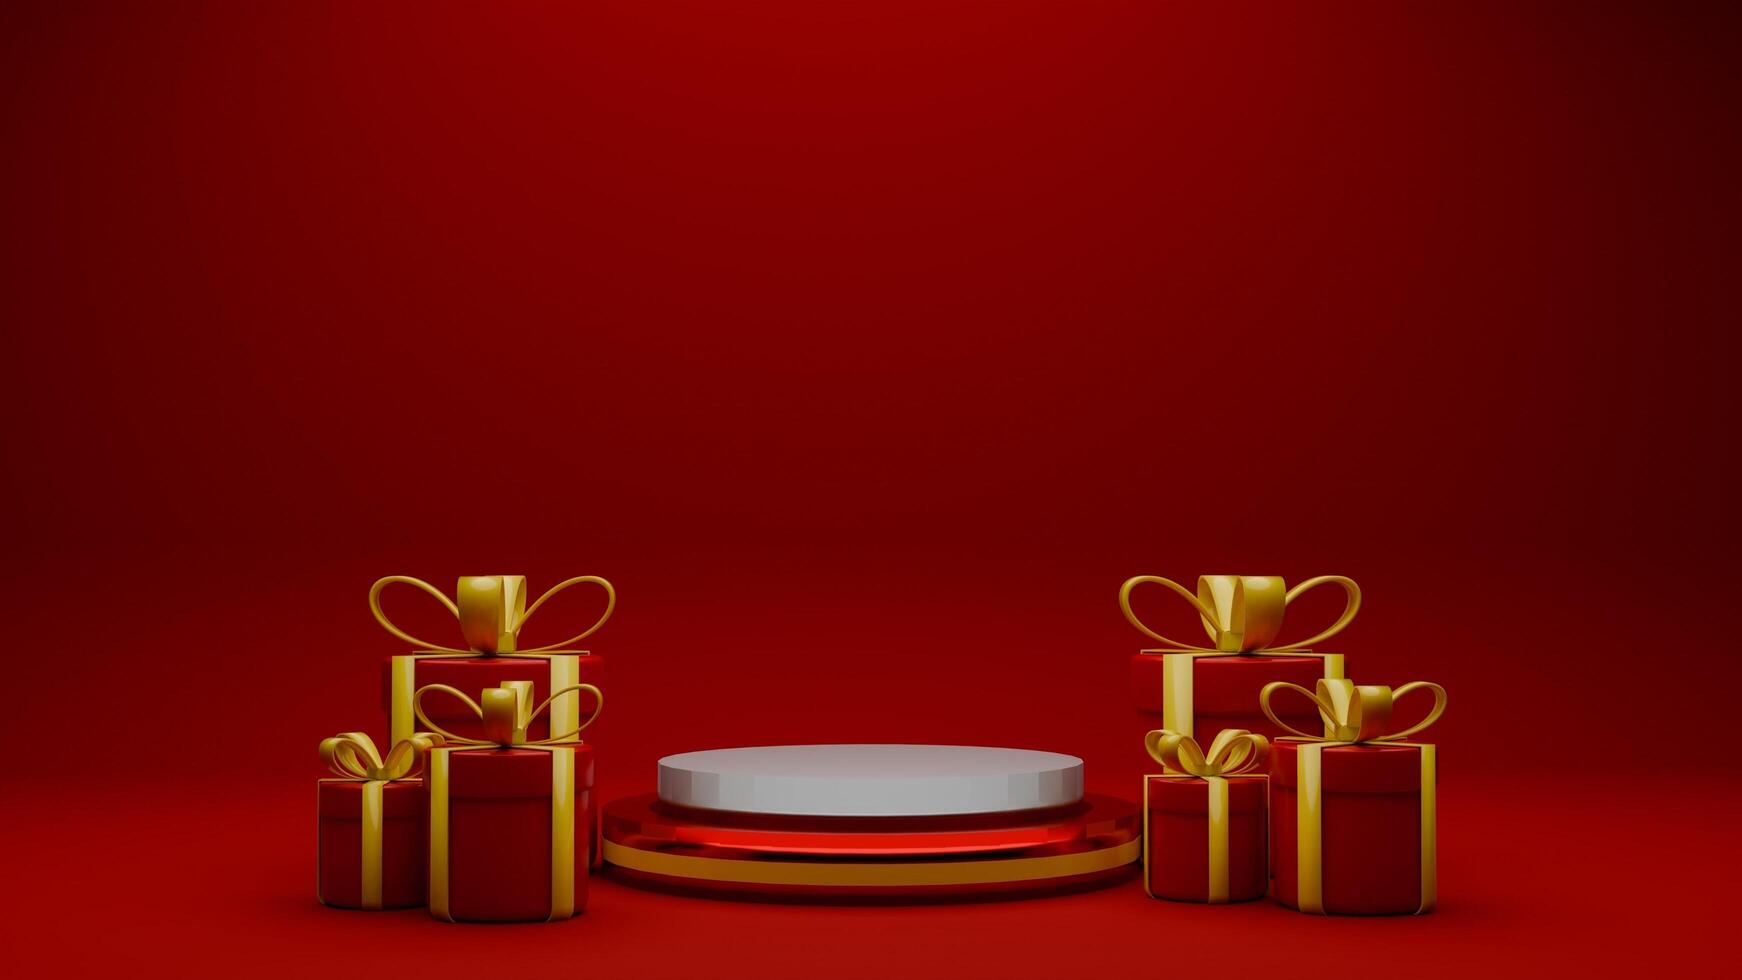 3D rendered red and gold valentine themed podium display featuring of gift boxes photo